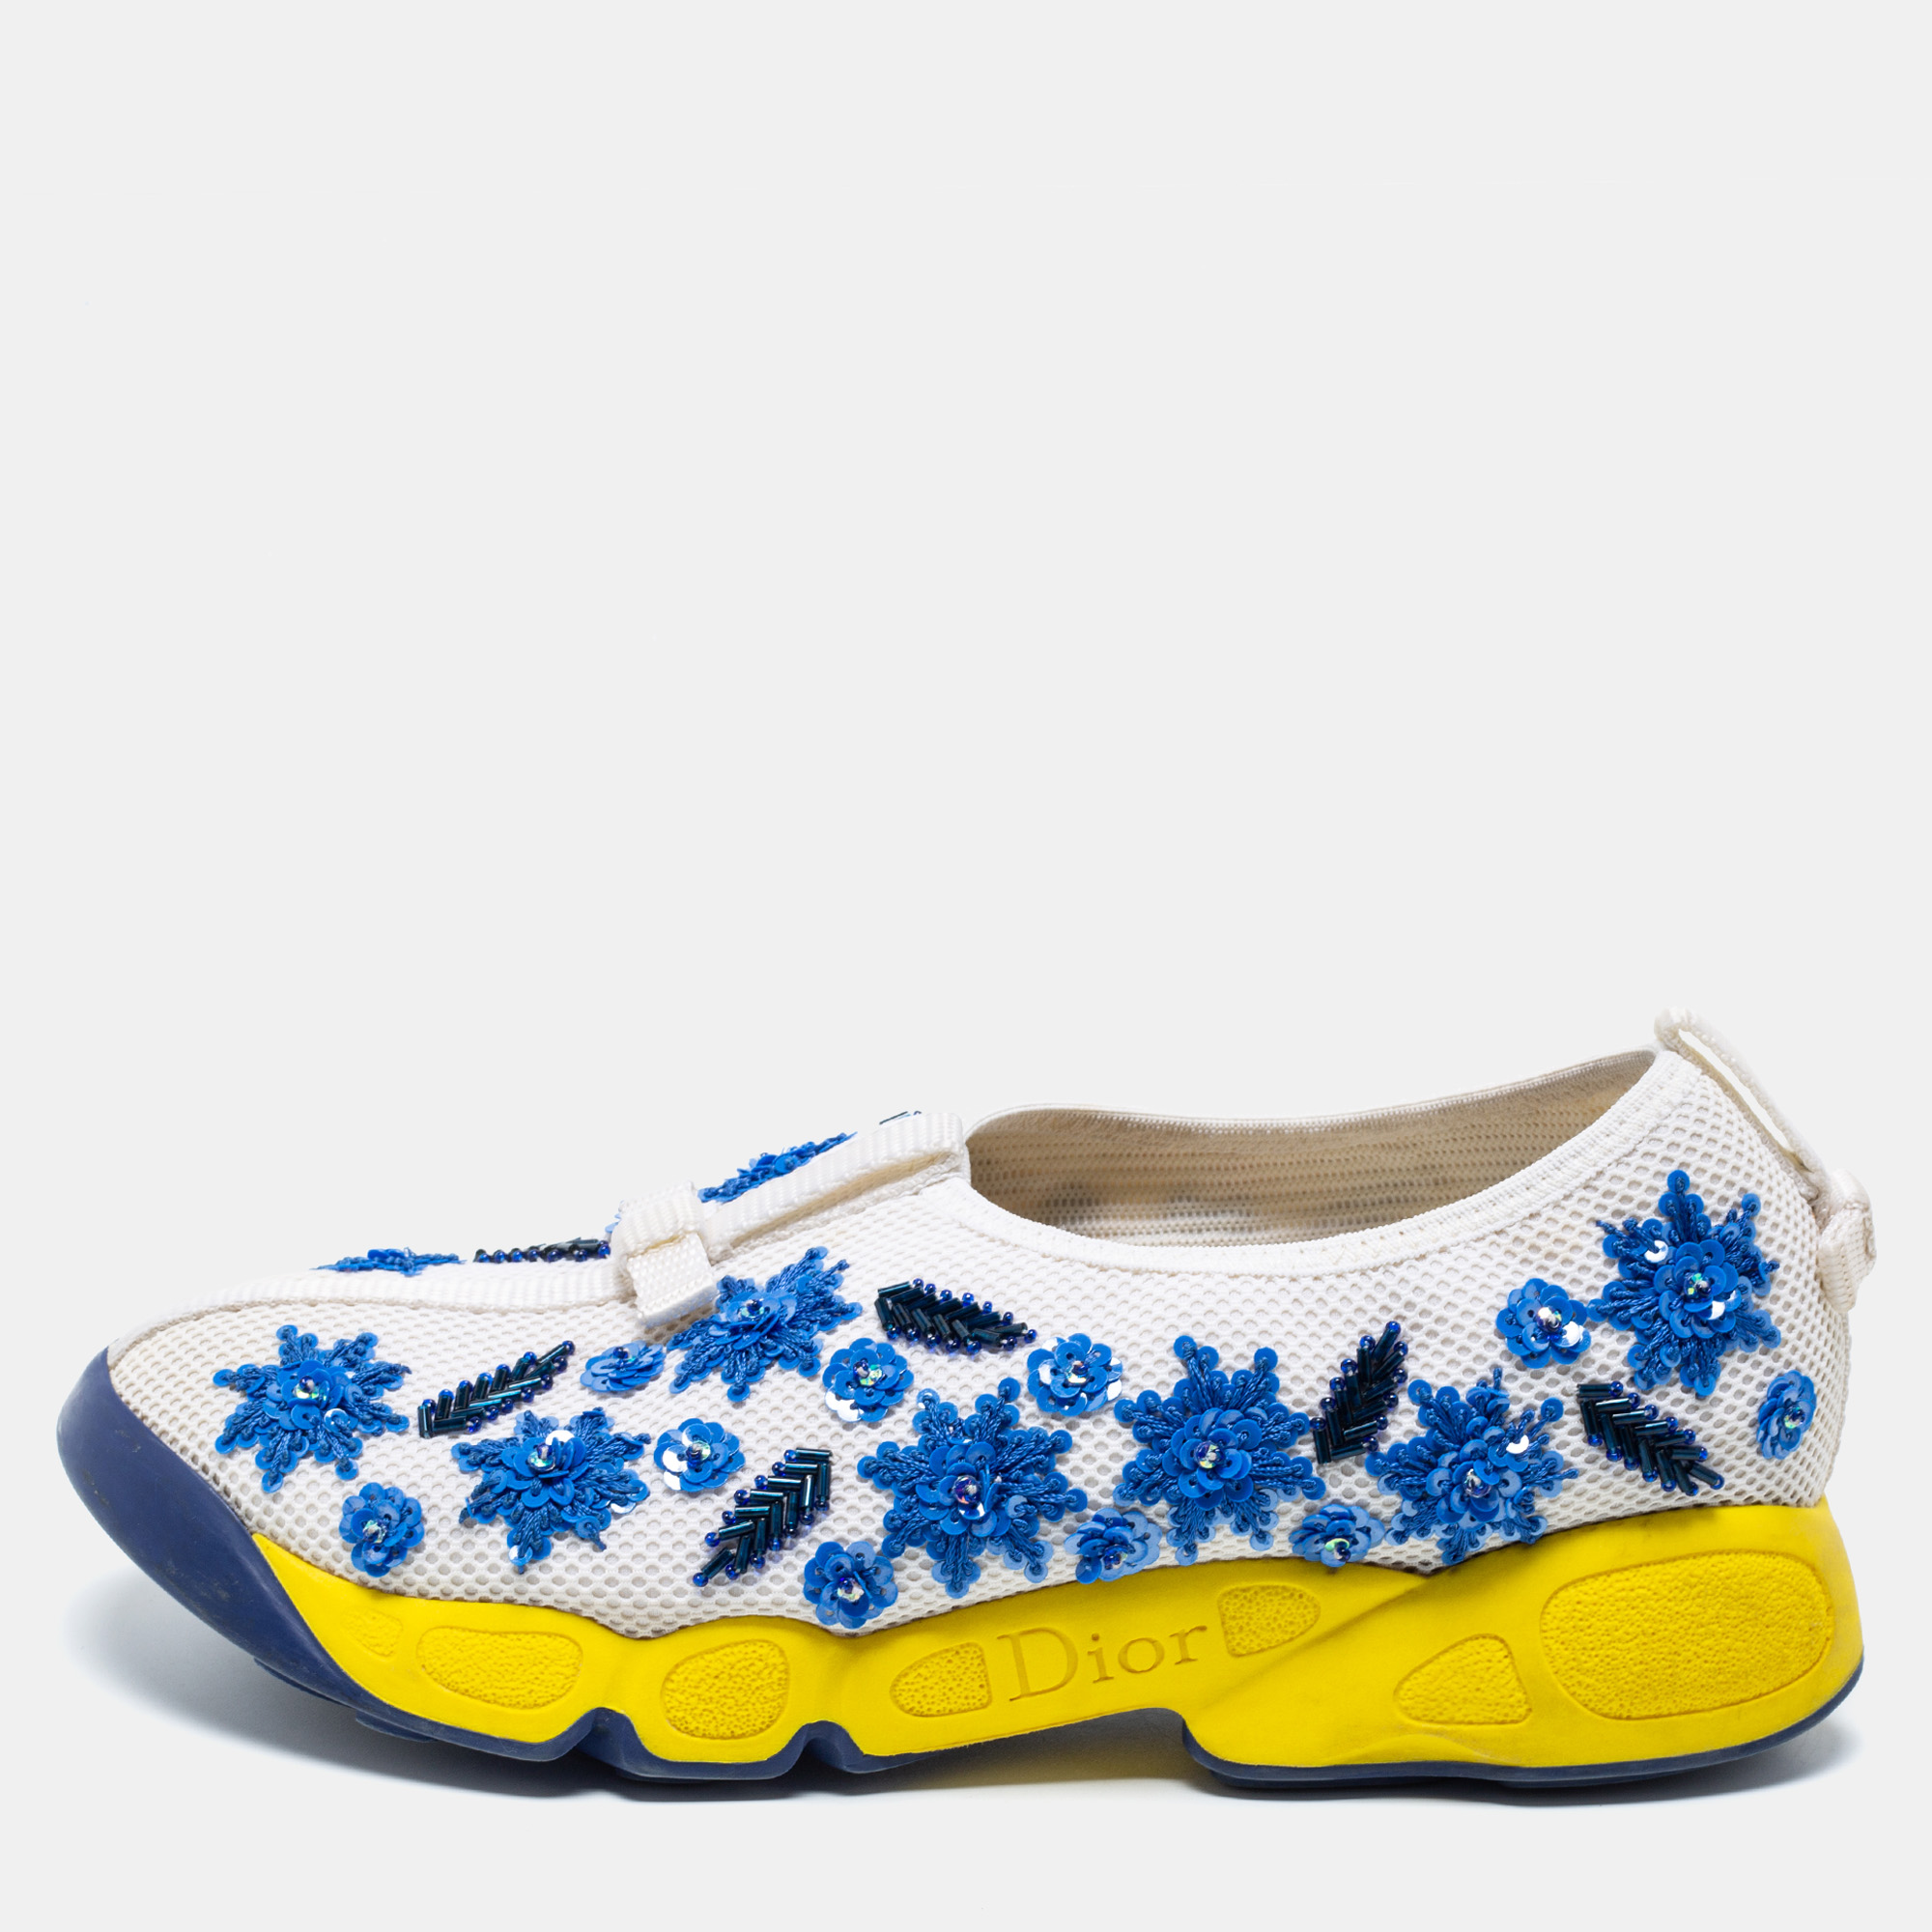 

Dior White/Blue Mesh Embellished Fusion Sneakers Size